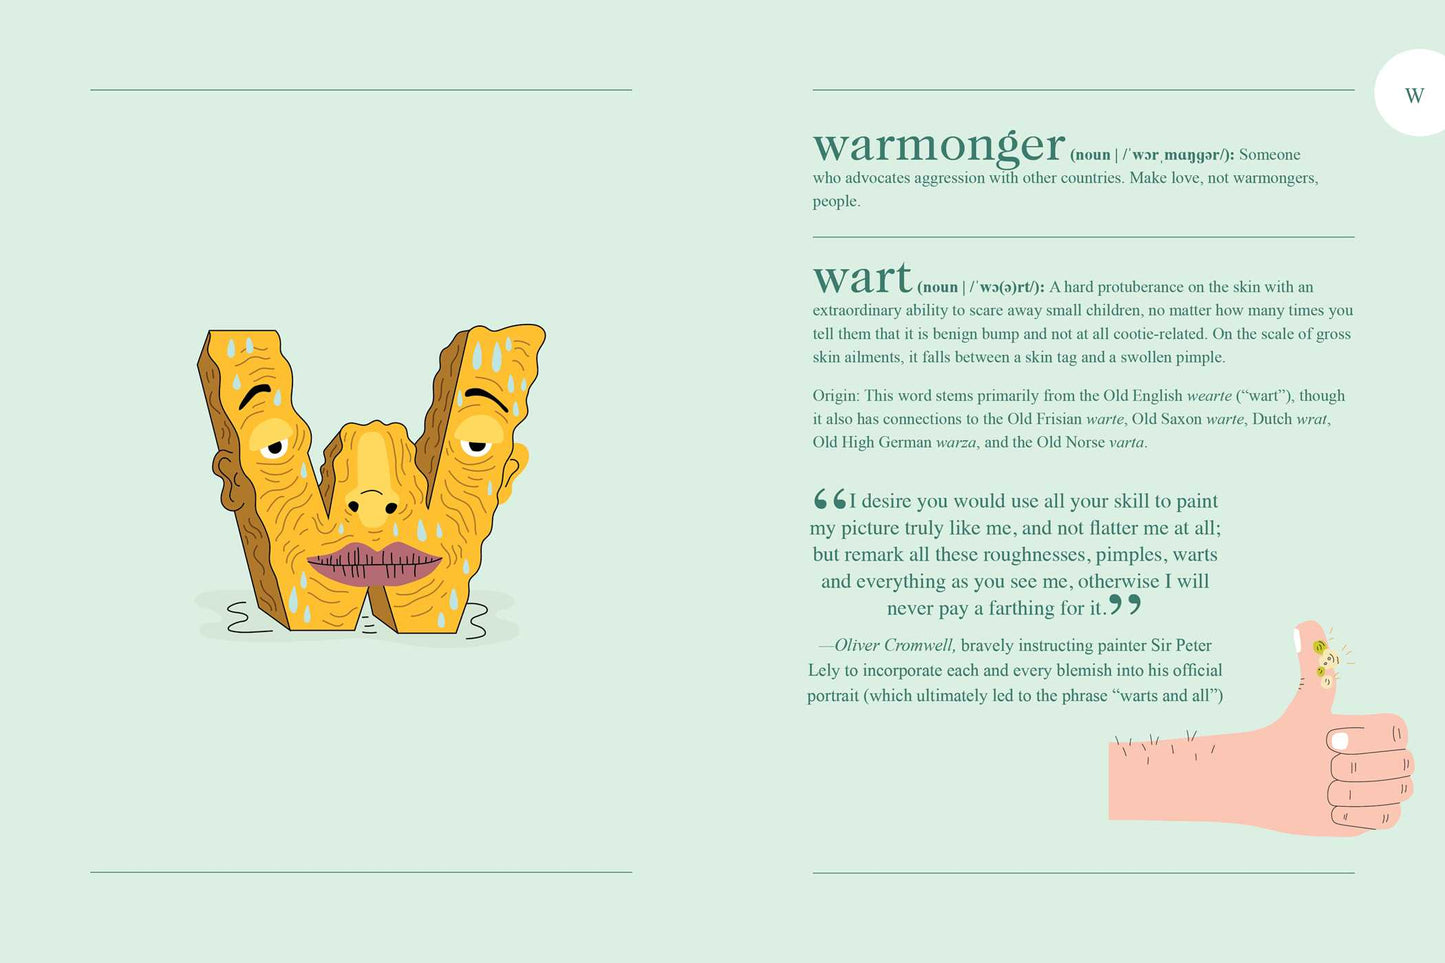 The Illustrated Compendium of Ugly English Words: Including Phlegm, Chunky, Moist, and More